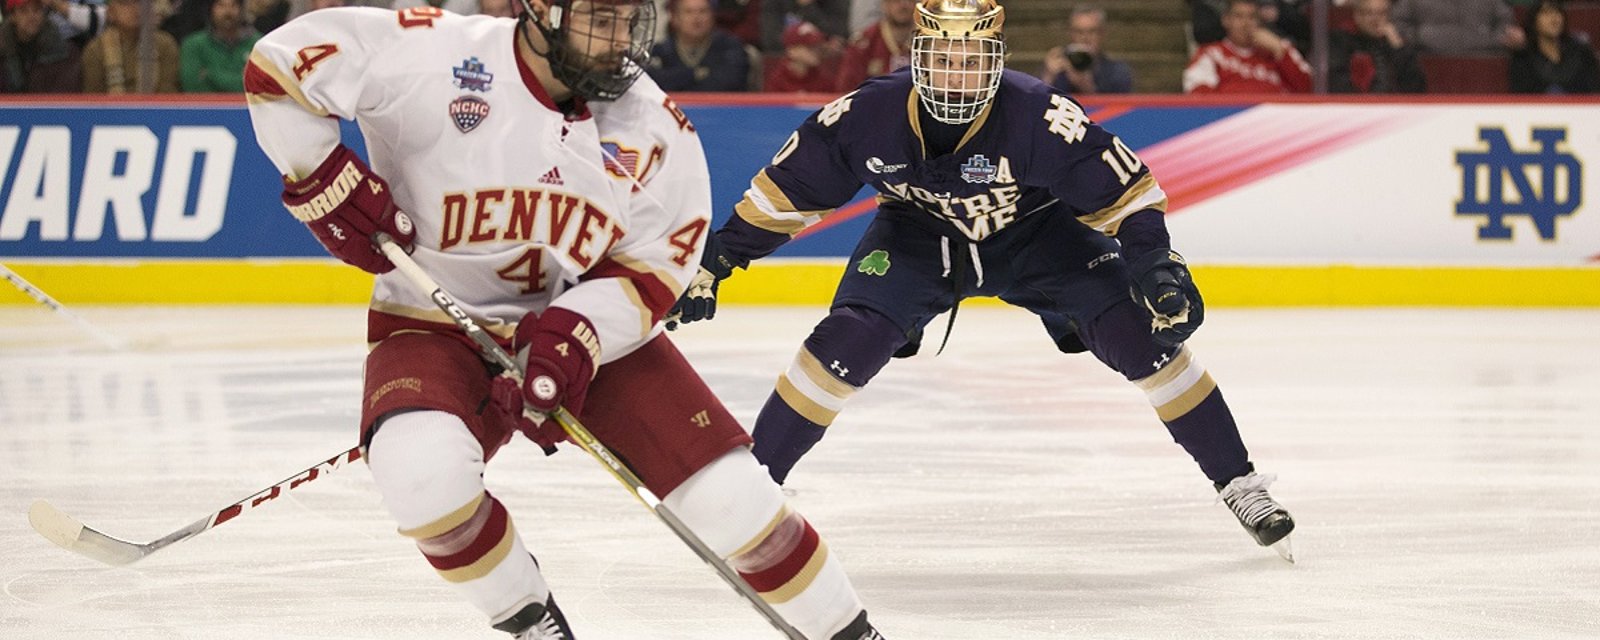 The best player in college hockey has narrowed it down to 3 NHL teams!